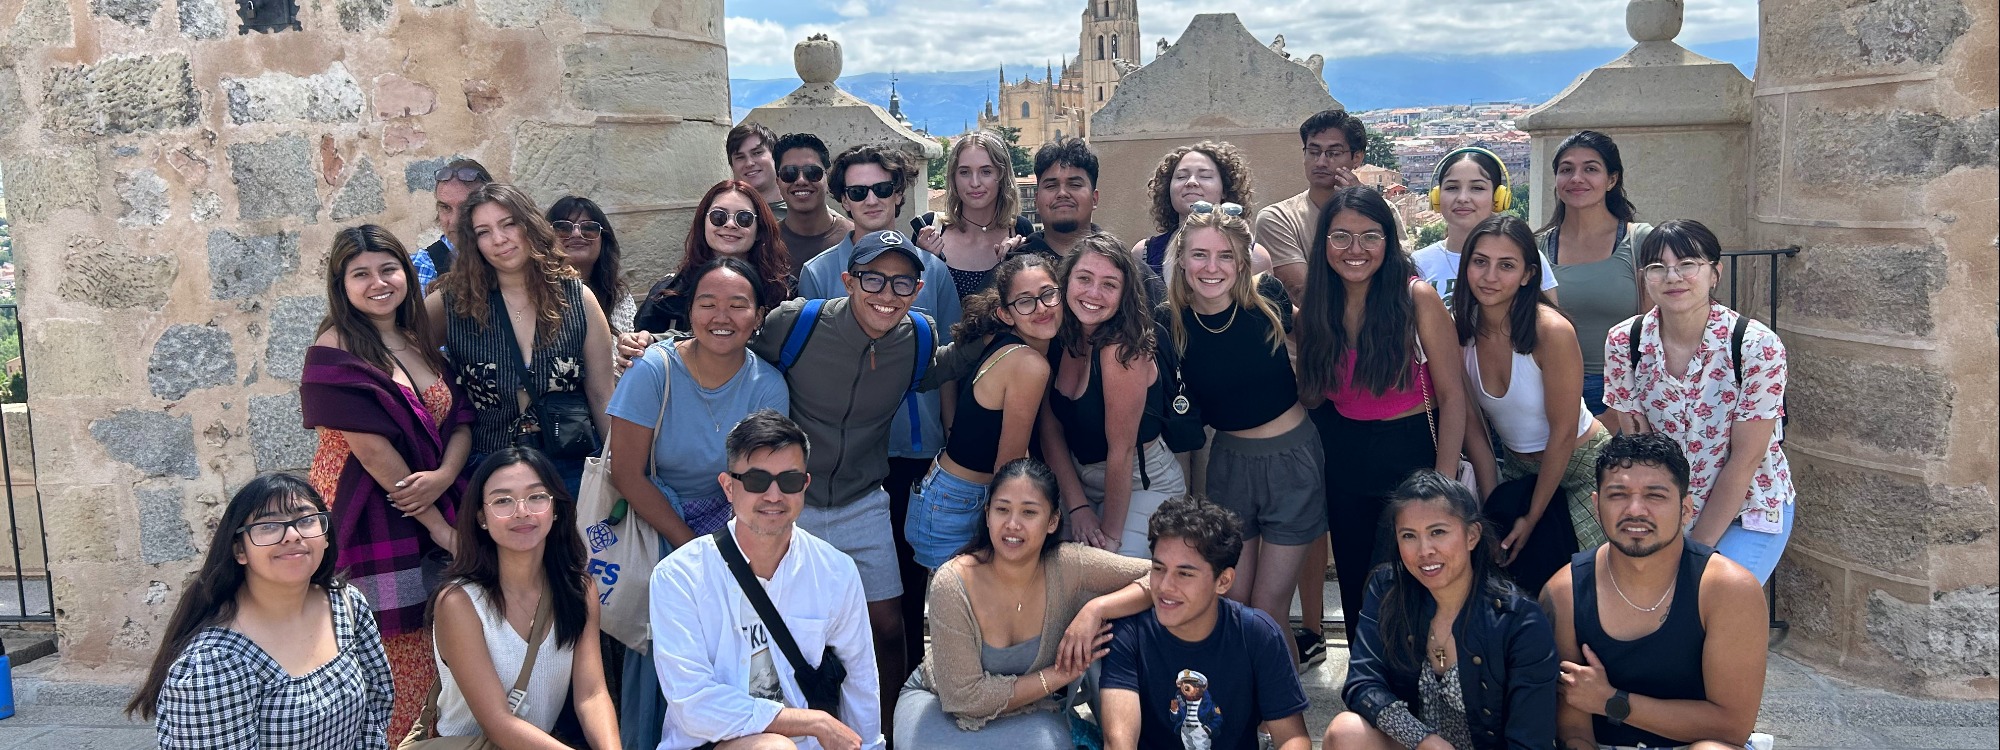 30 students pose for a group photo with Madrid in the background